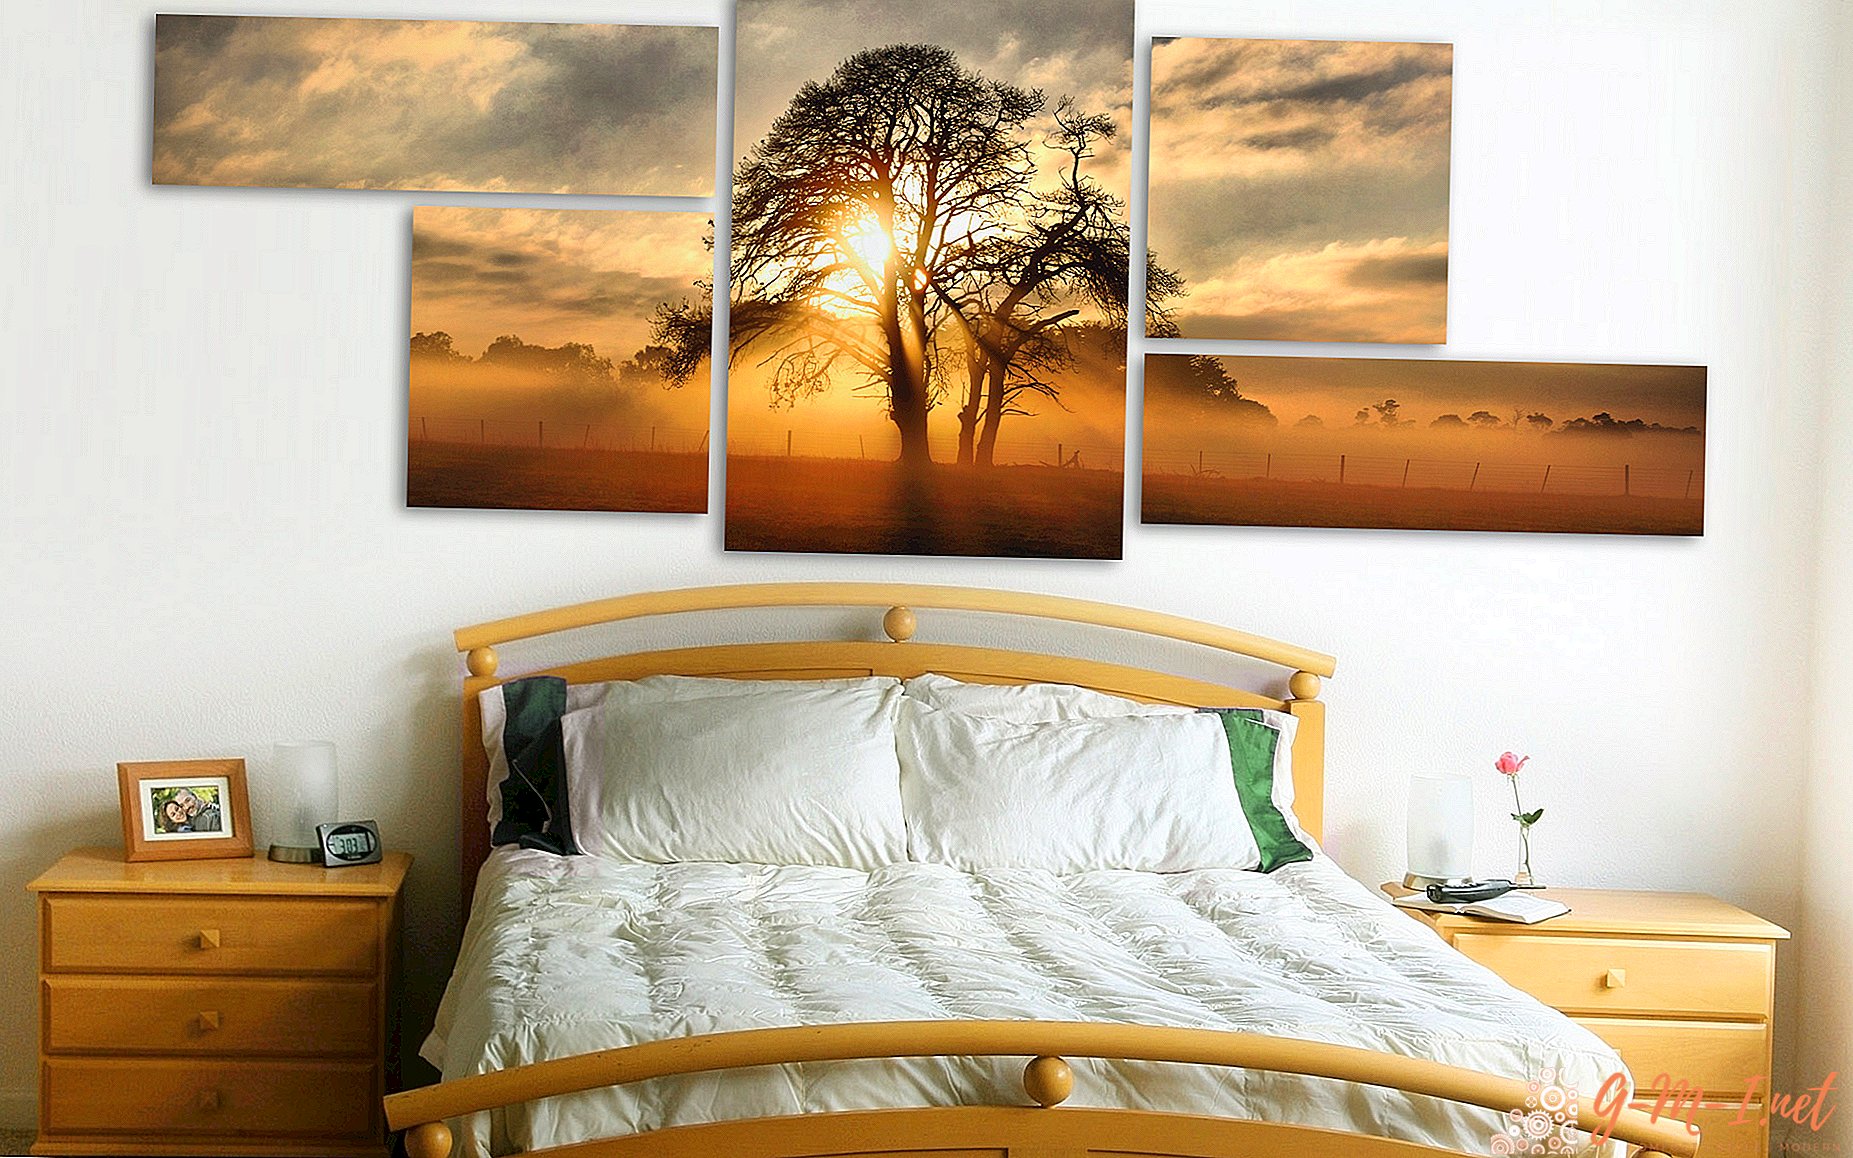 What to hang over the bed in the bedroom